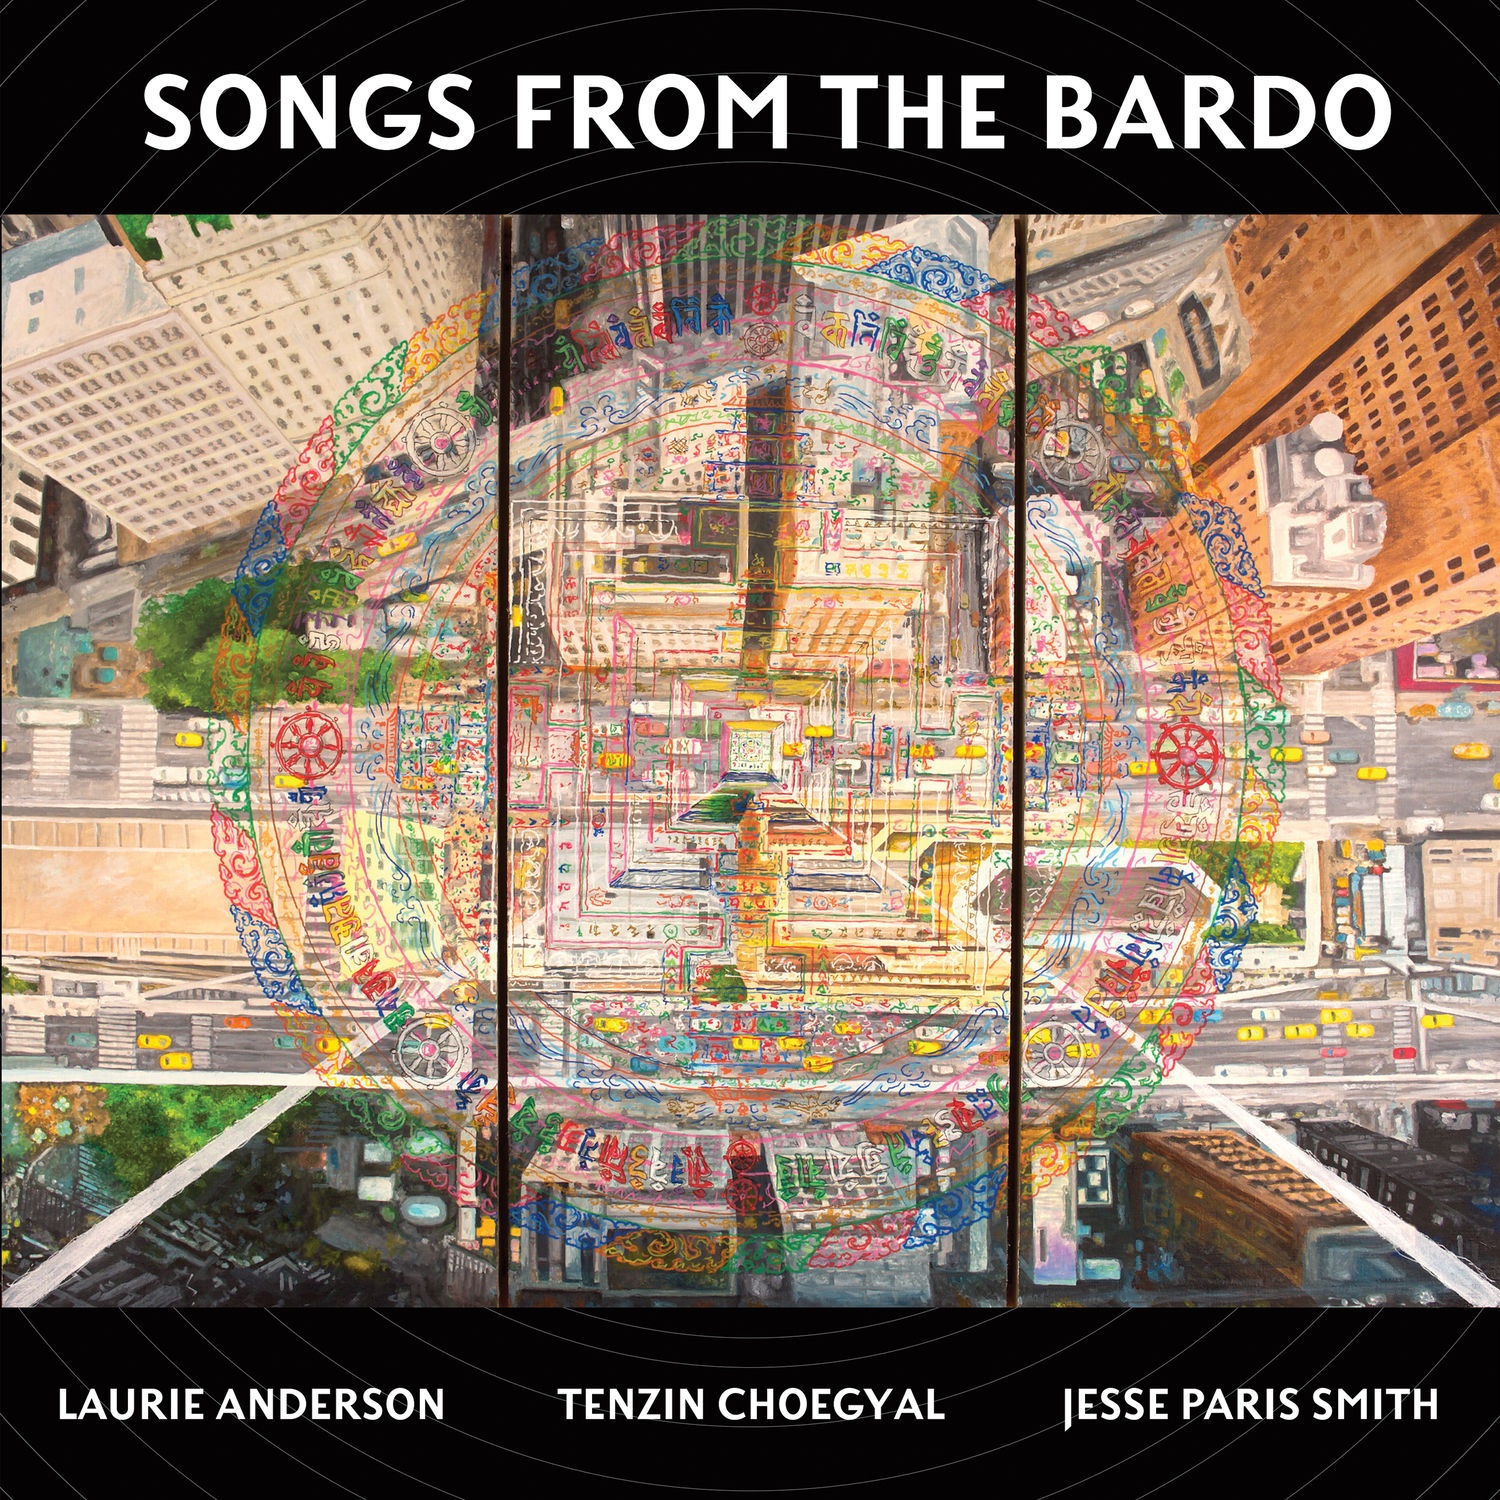 Laurie Anderson, Tenzin Choegyal & Jesse Paris Smith – Songs From the Bardo (2019) [FLAC 24bit/96kHz]